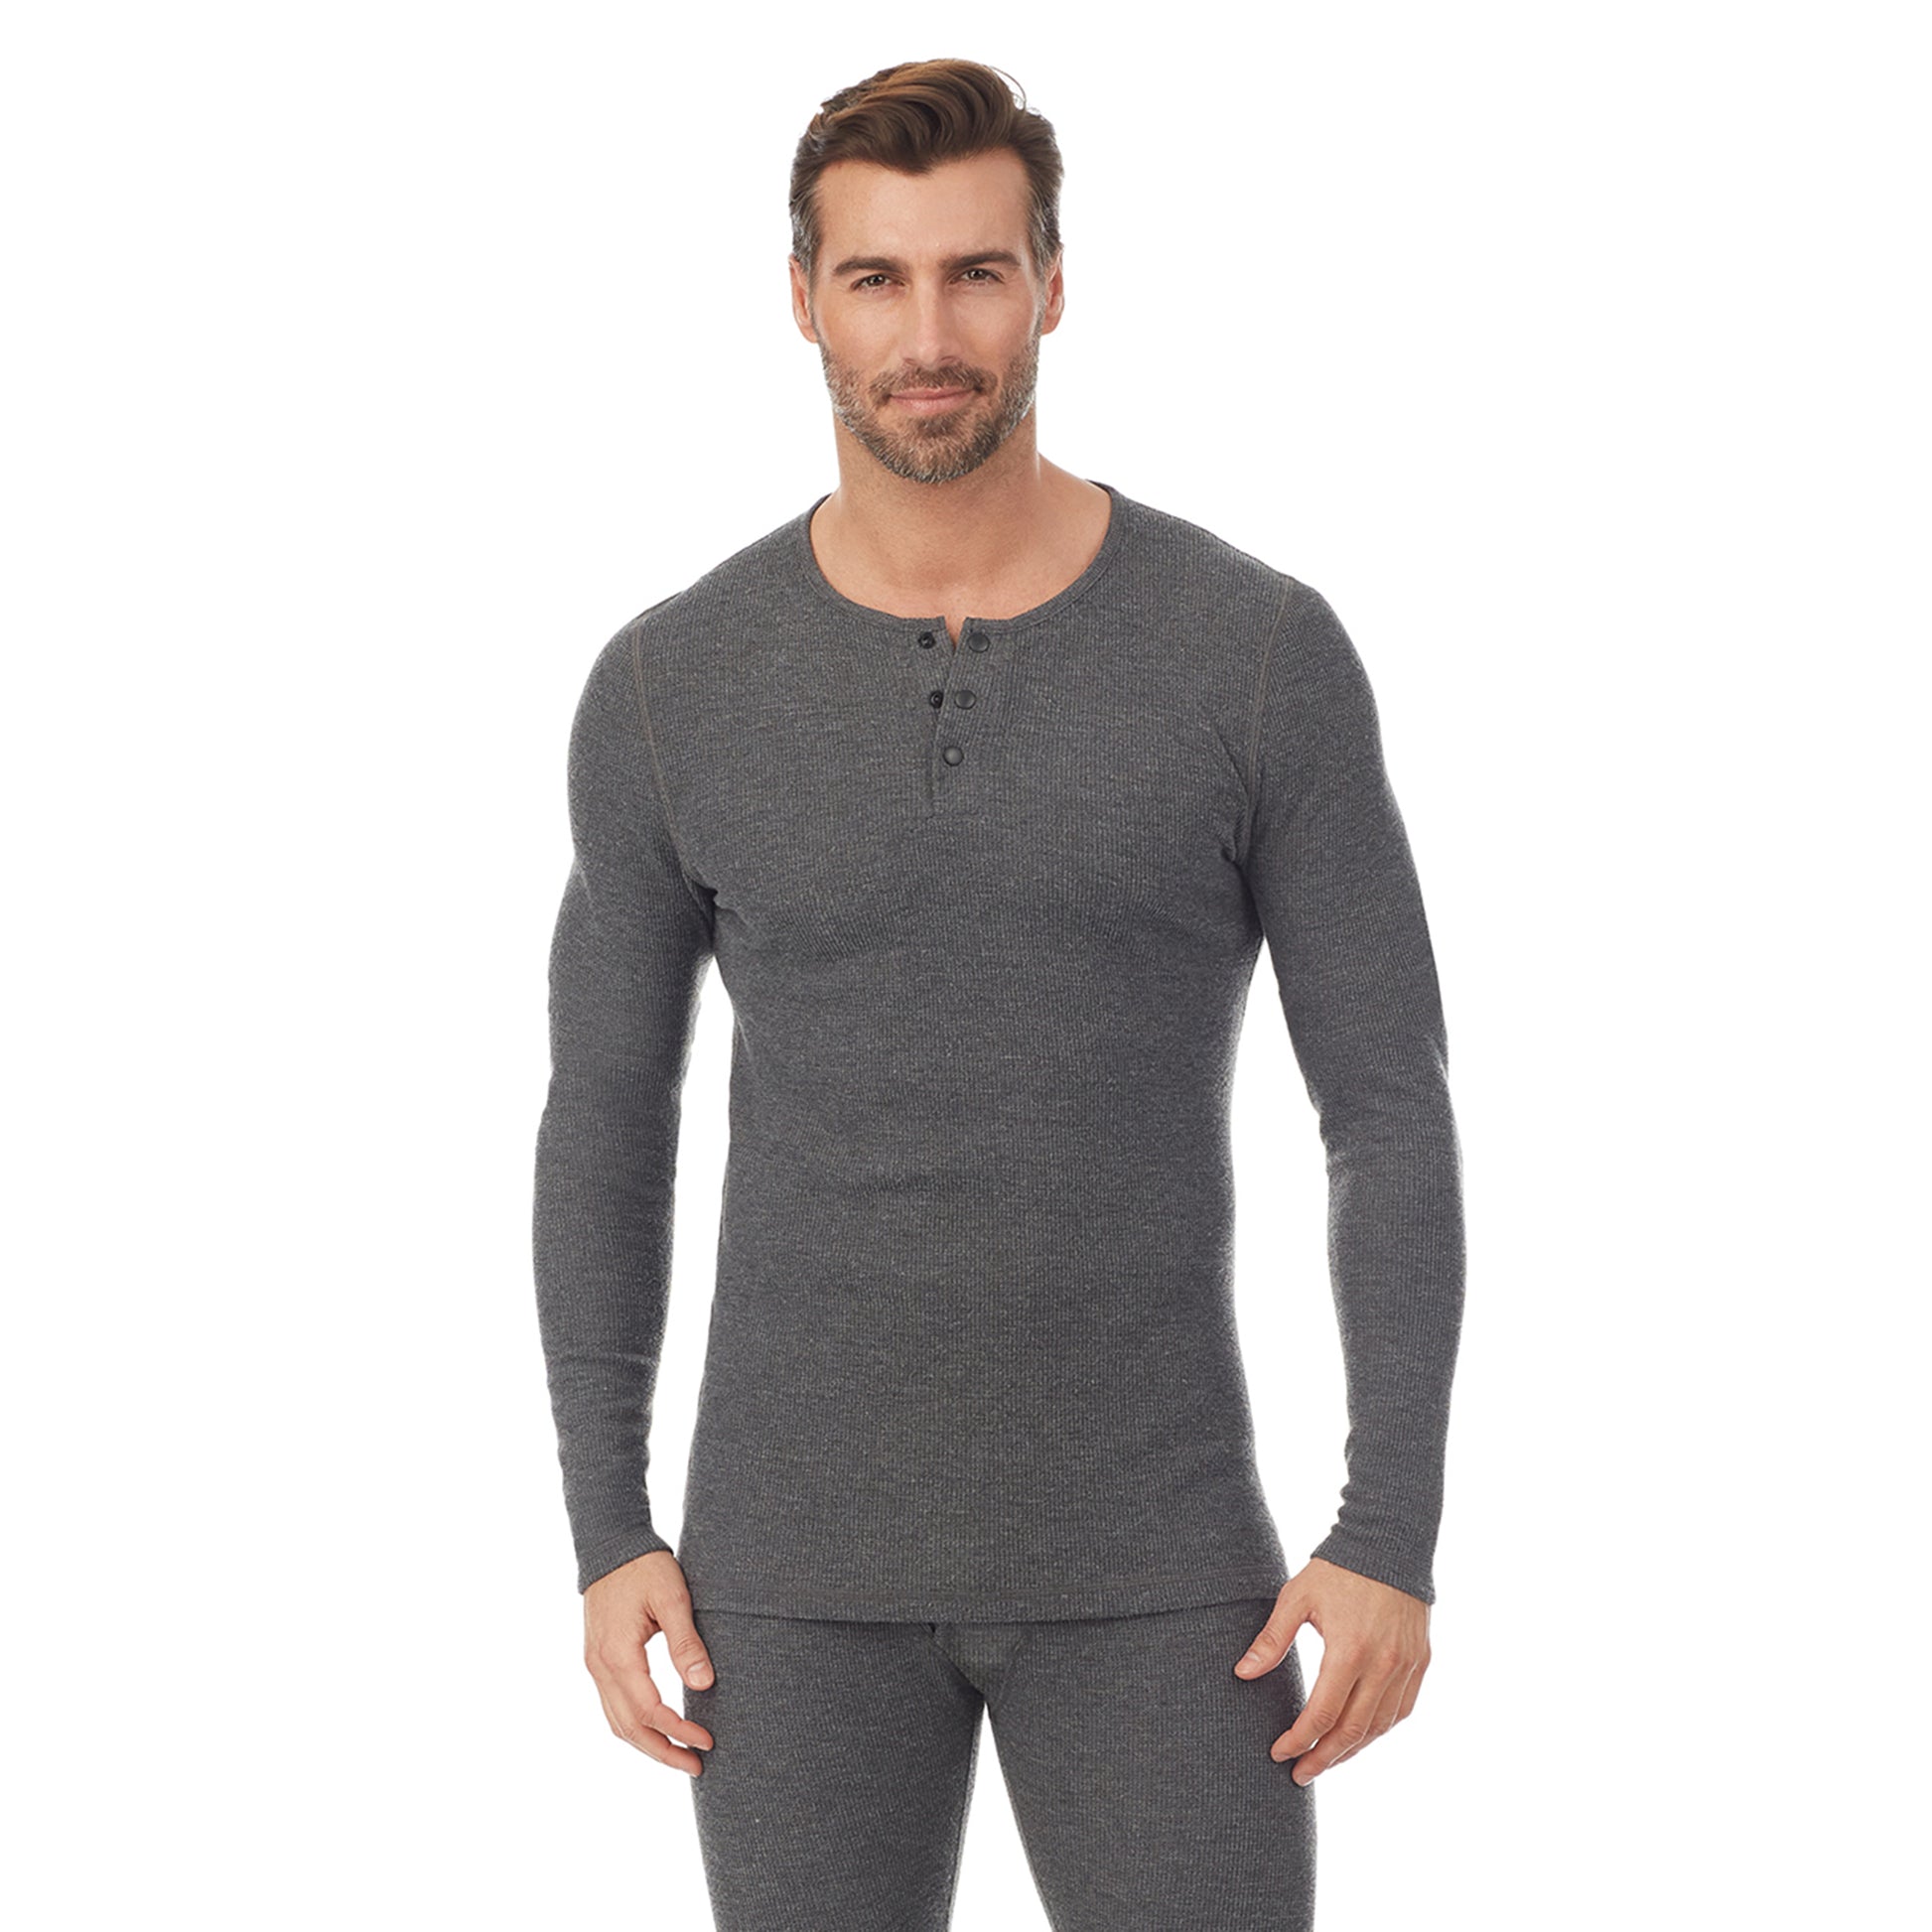 Charcoal Heather; Model is wearing size M. He is 6'1", Waist 32", Inseam 32". @A man wearing a charcoal heather long sleeve henley t-shirt.